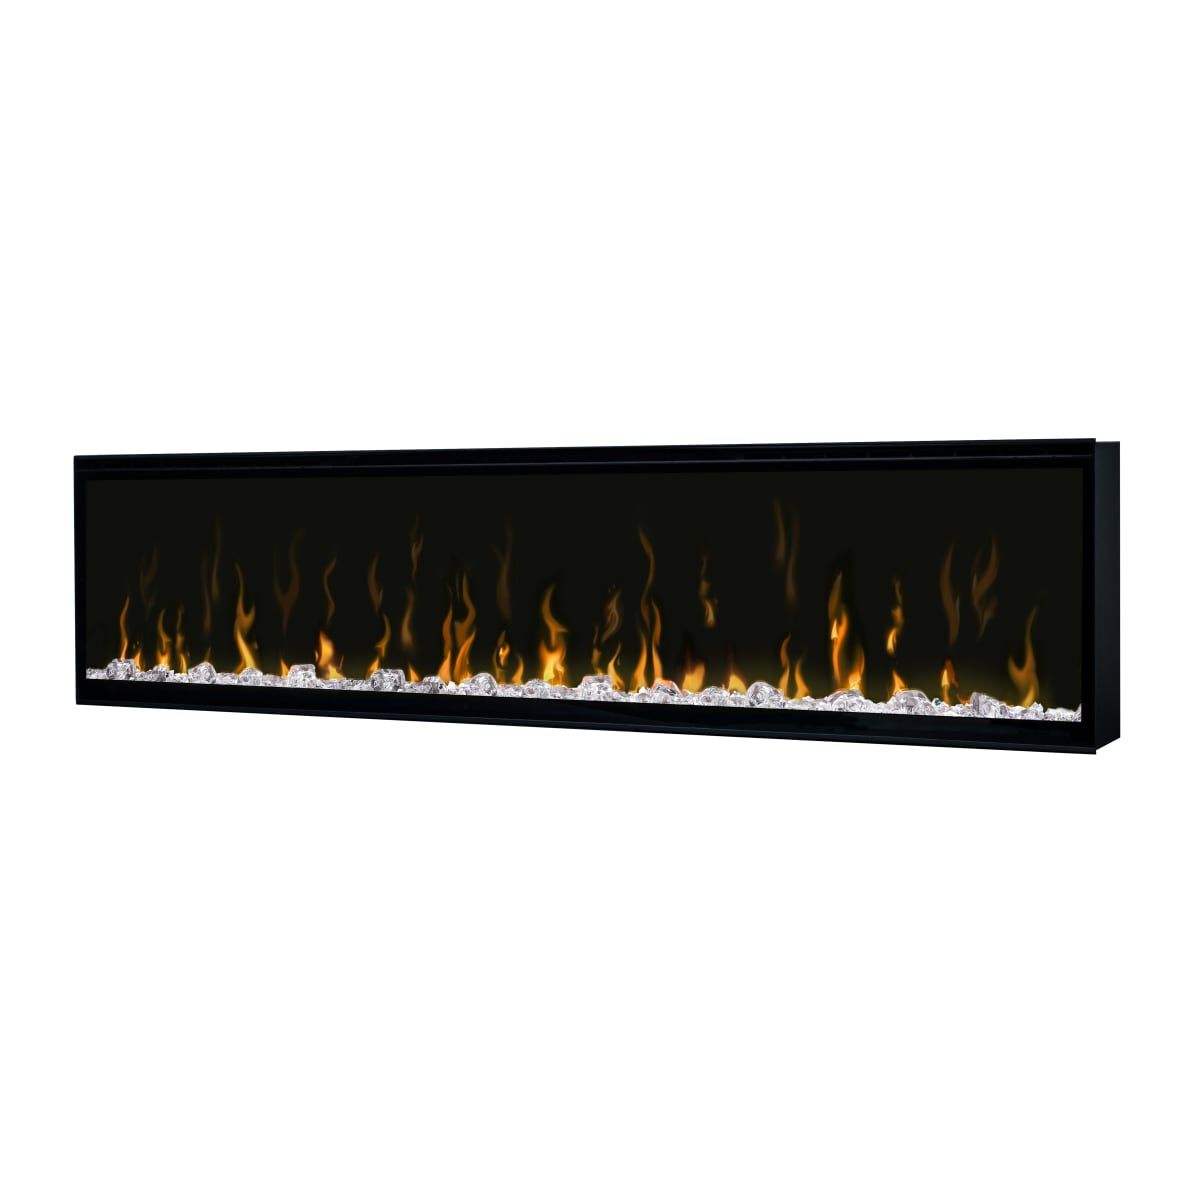 Fire and Ice Fireplace Awesome Warm House Vwwf Valencia Widescreen Wall Mounted